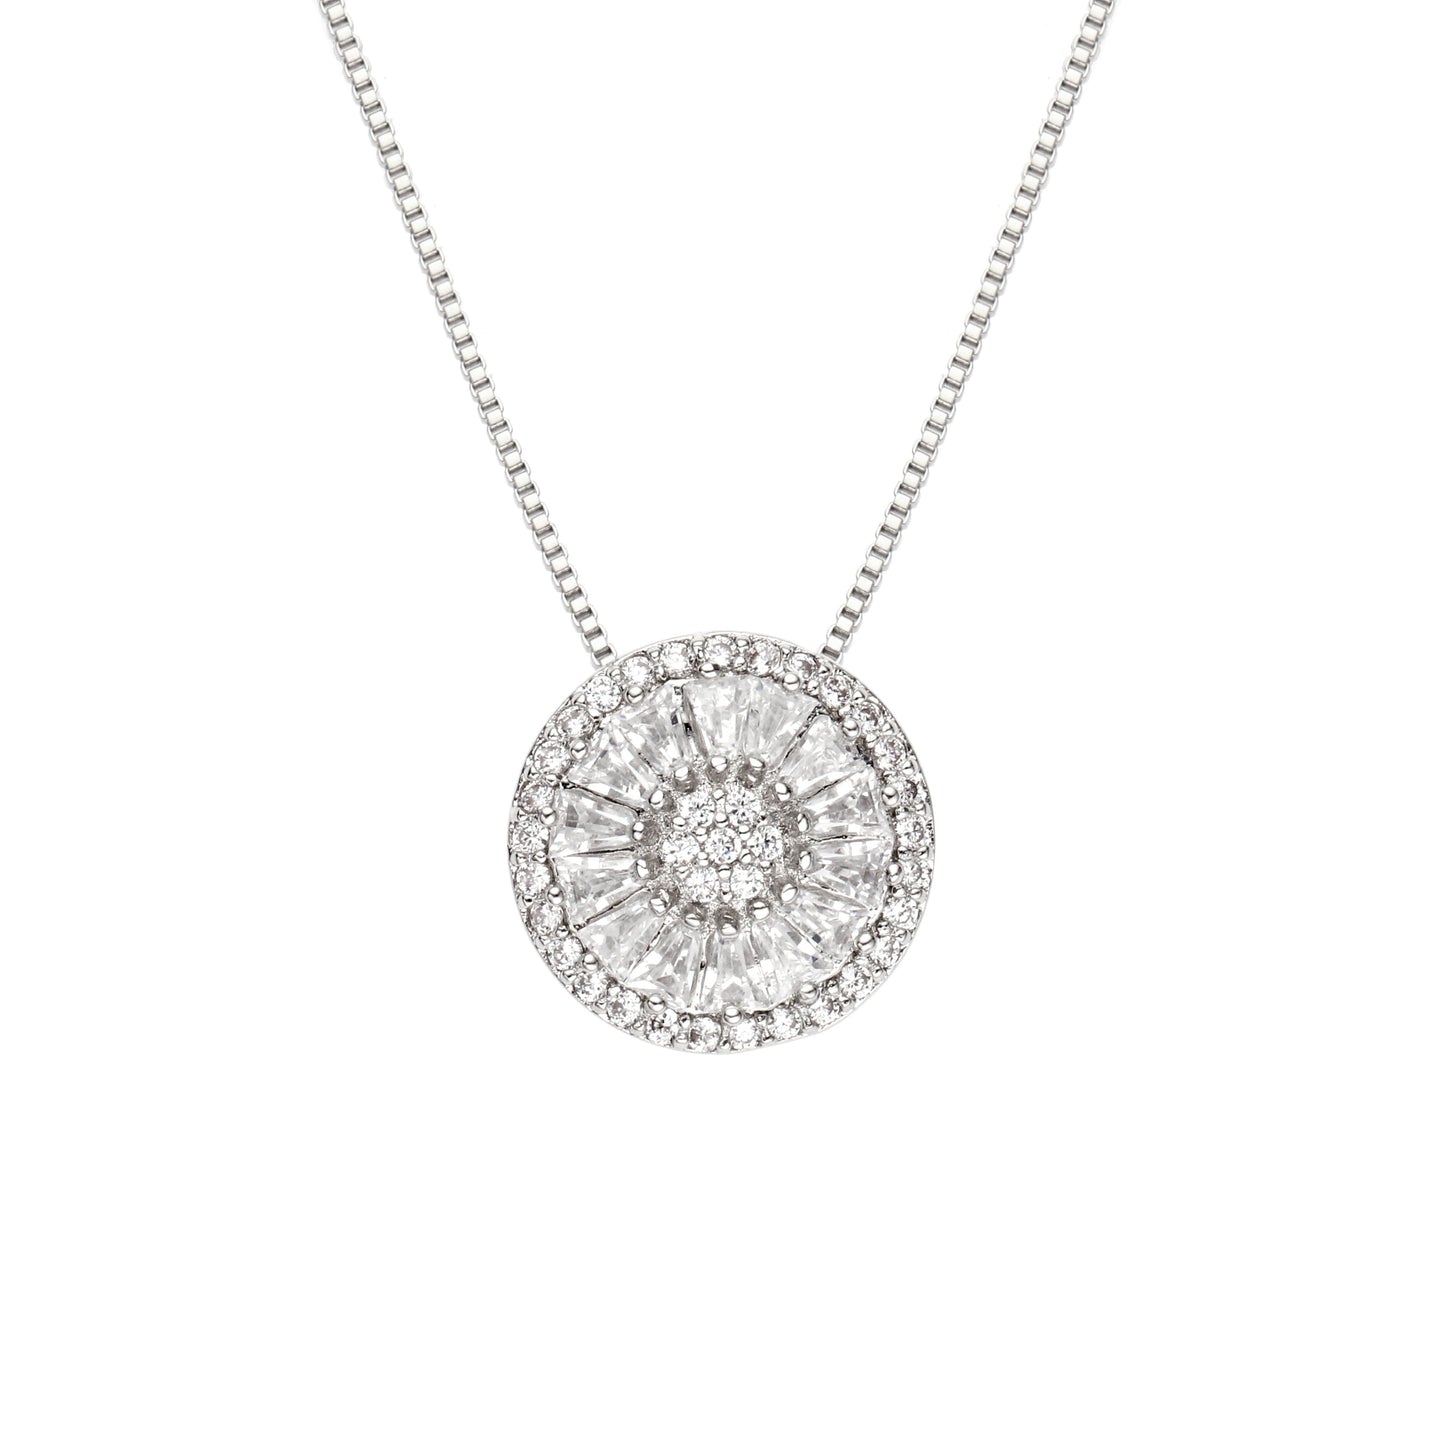 PIZZA NECKLACE | White Rhodium Plated